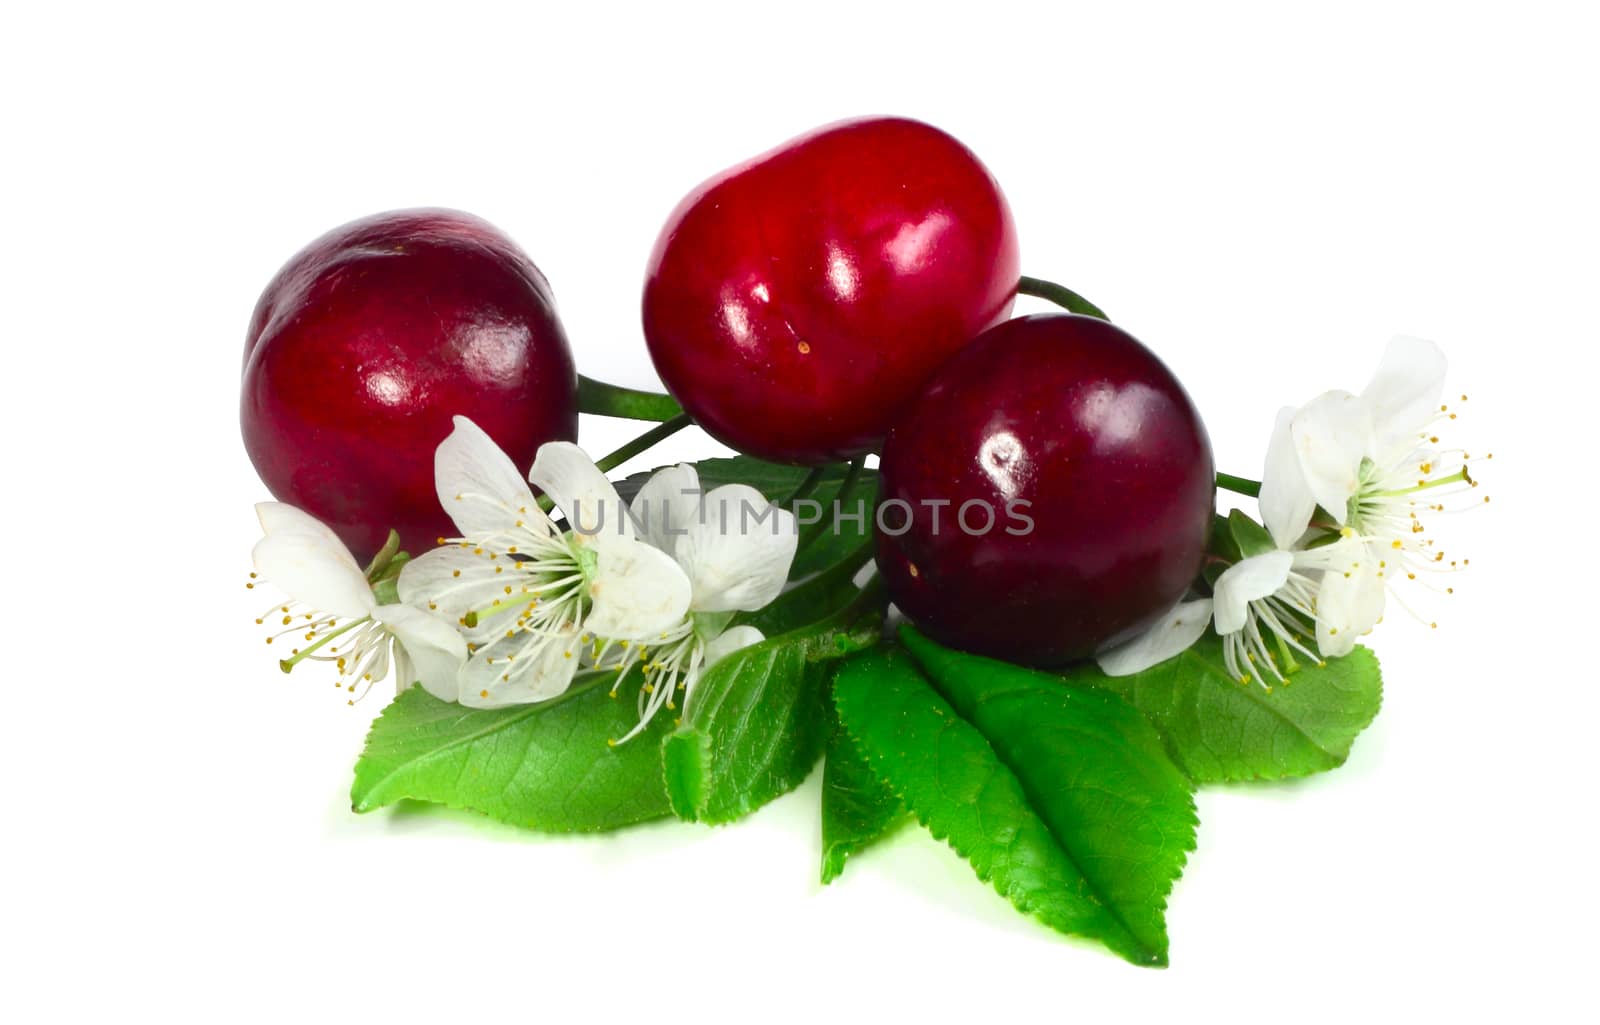 Cherry with leafs and flowers isolated on white background